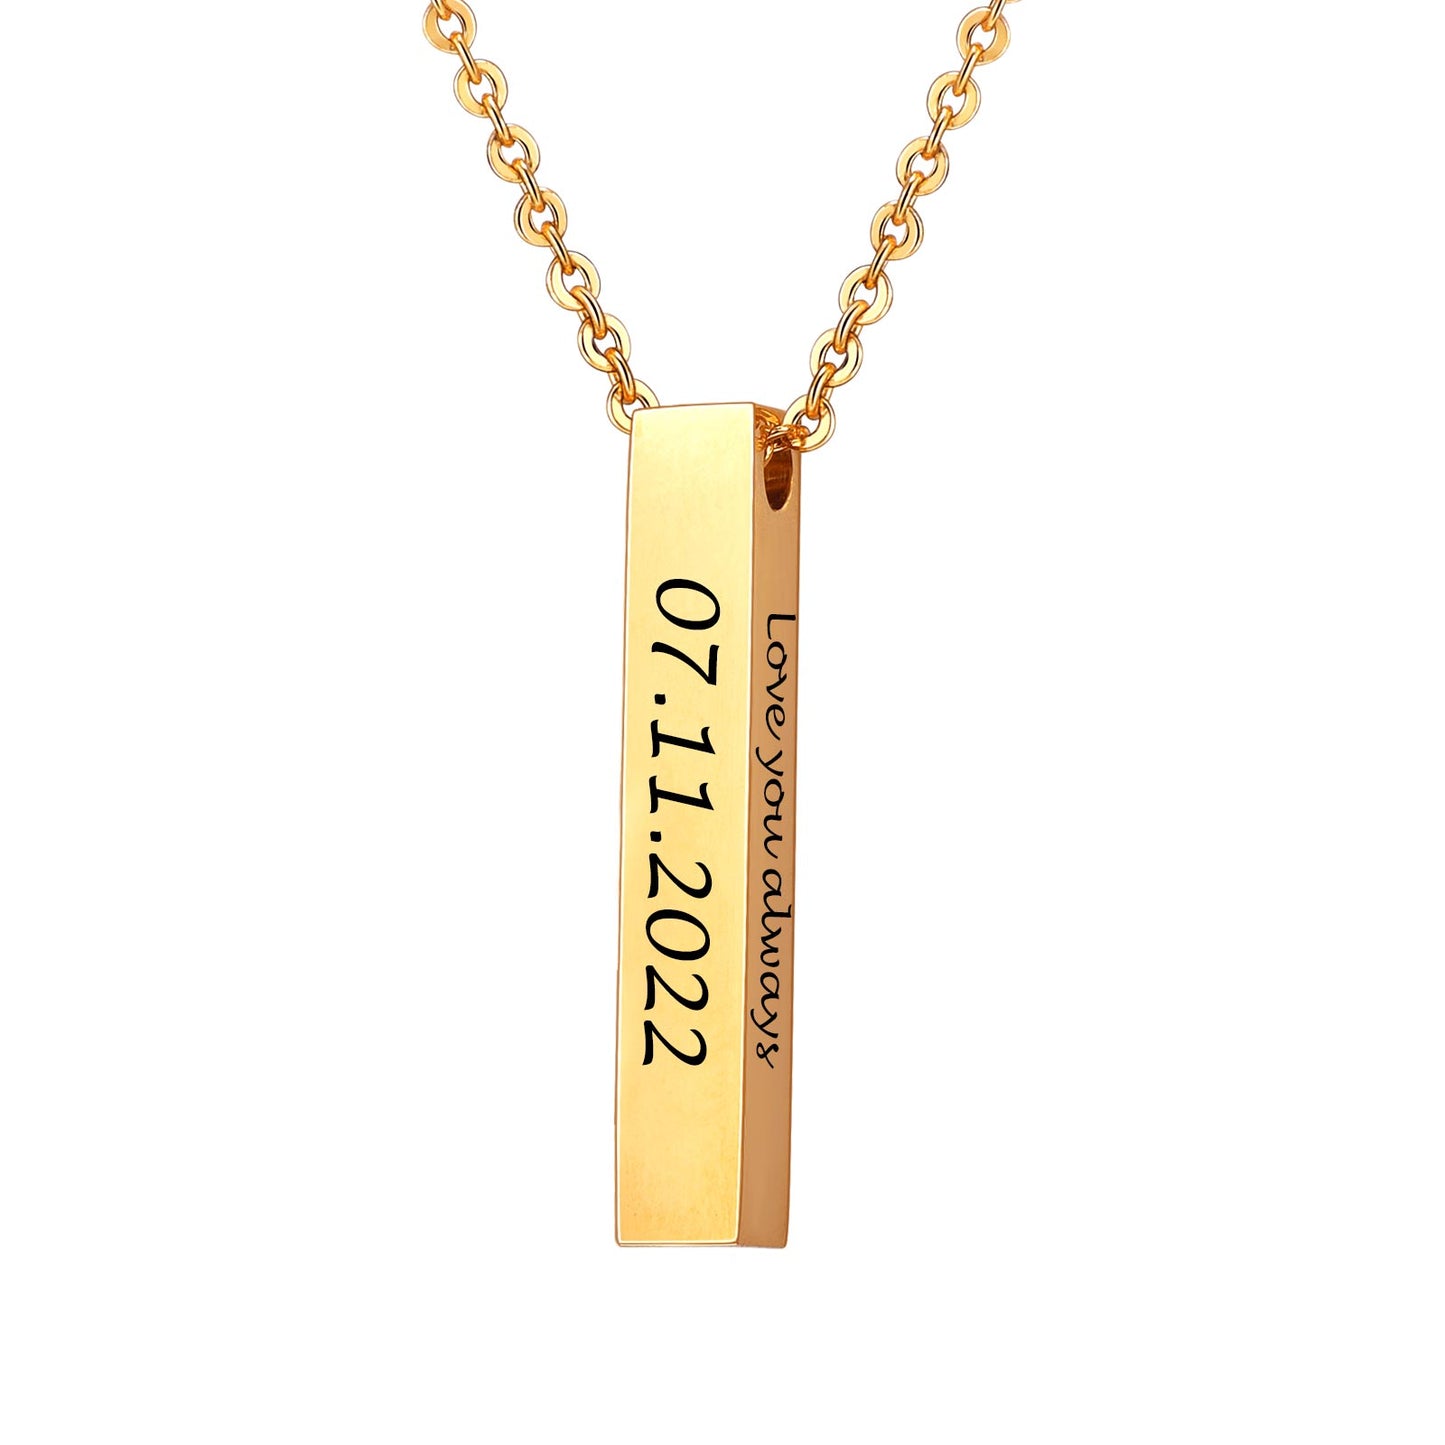 Personalized engraved Vertical Bar Necklaces Gold